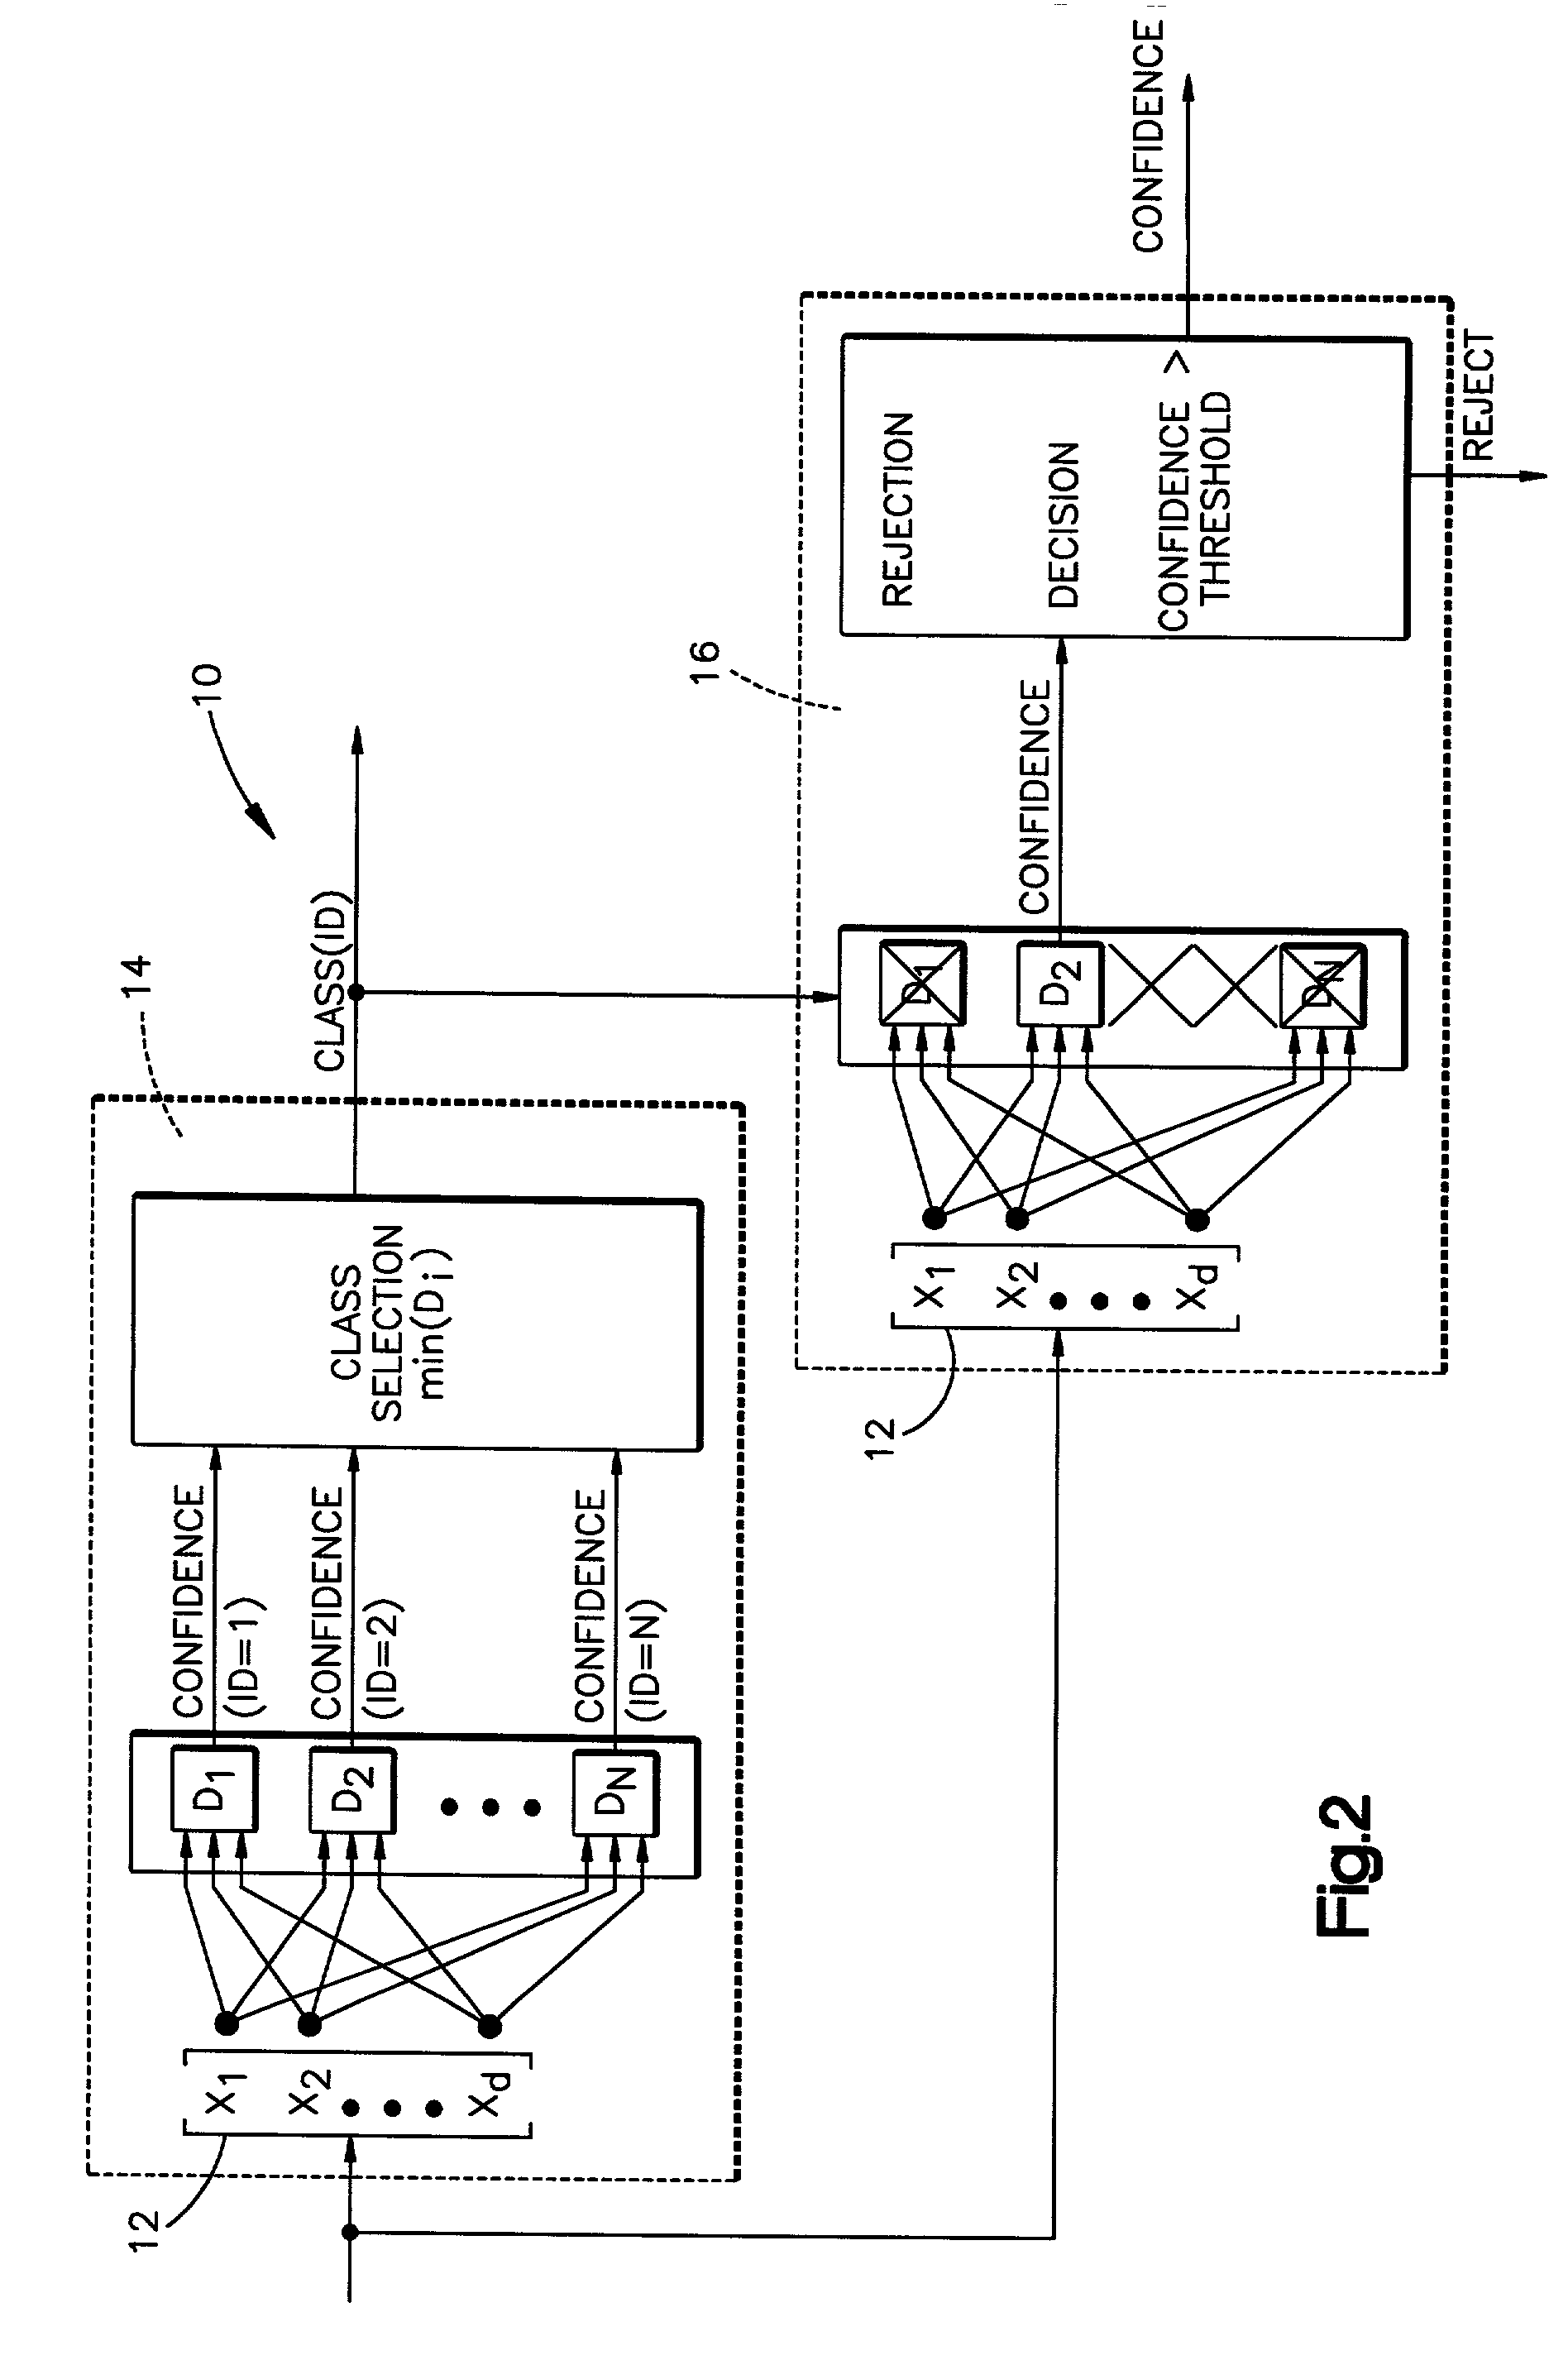 Compound classifier for pattern recognition applications